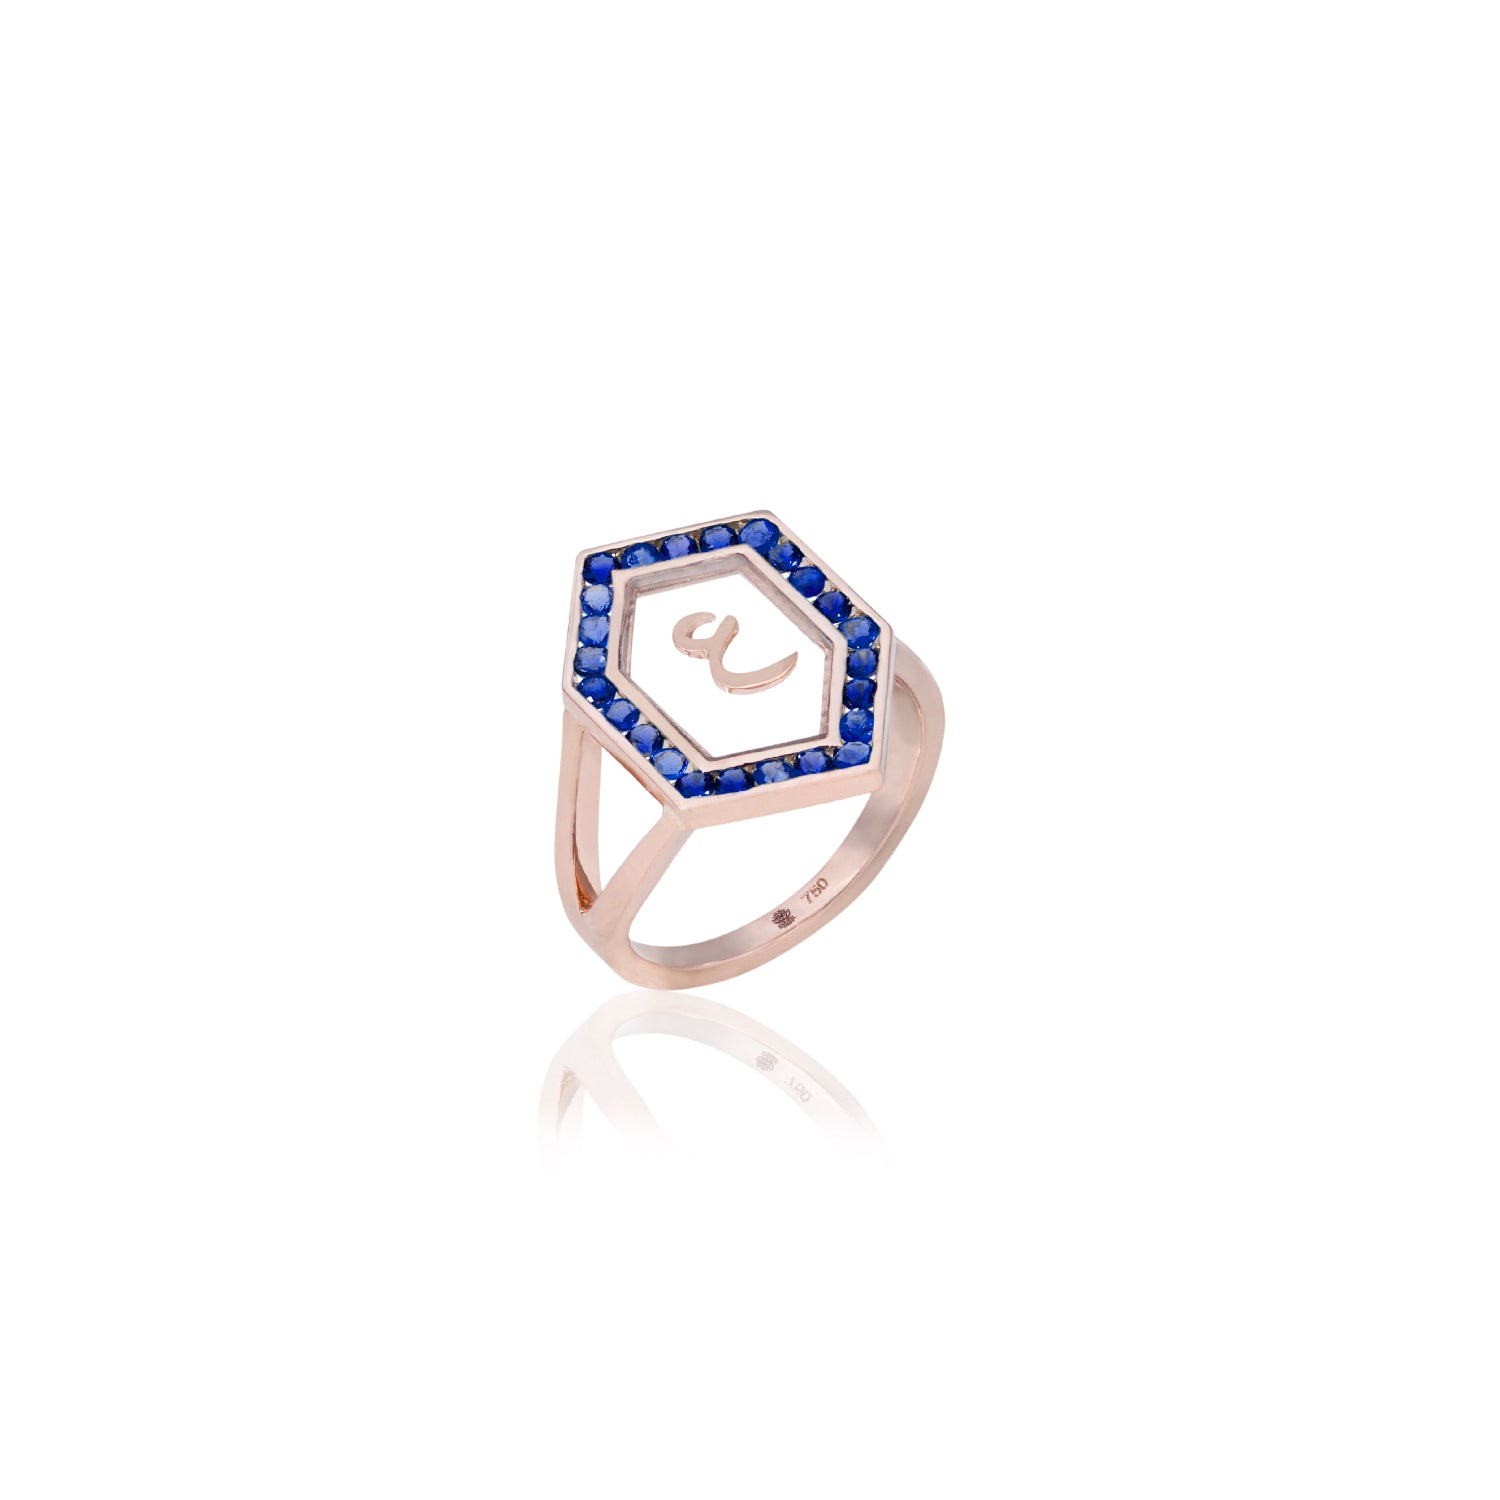 Qamoos 1.0 Letter ع Sapphire Ring in Rose Gold